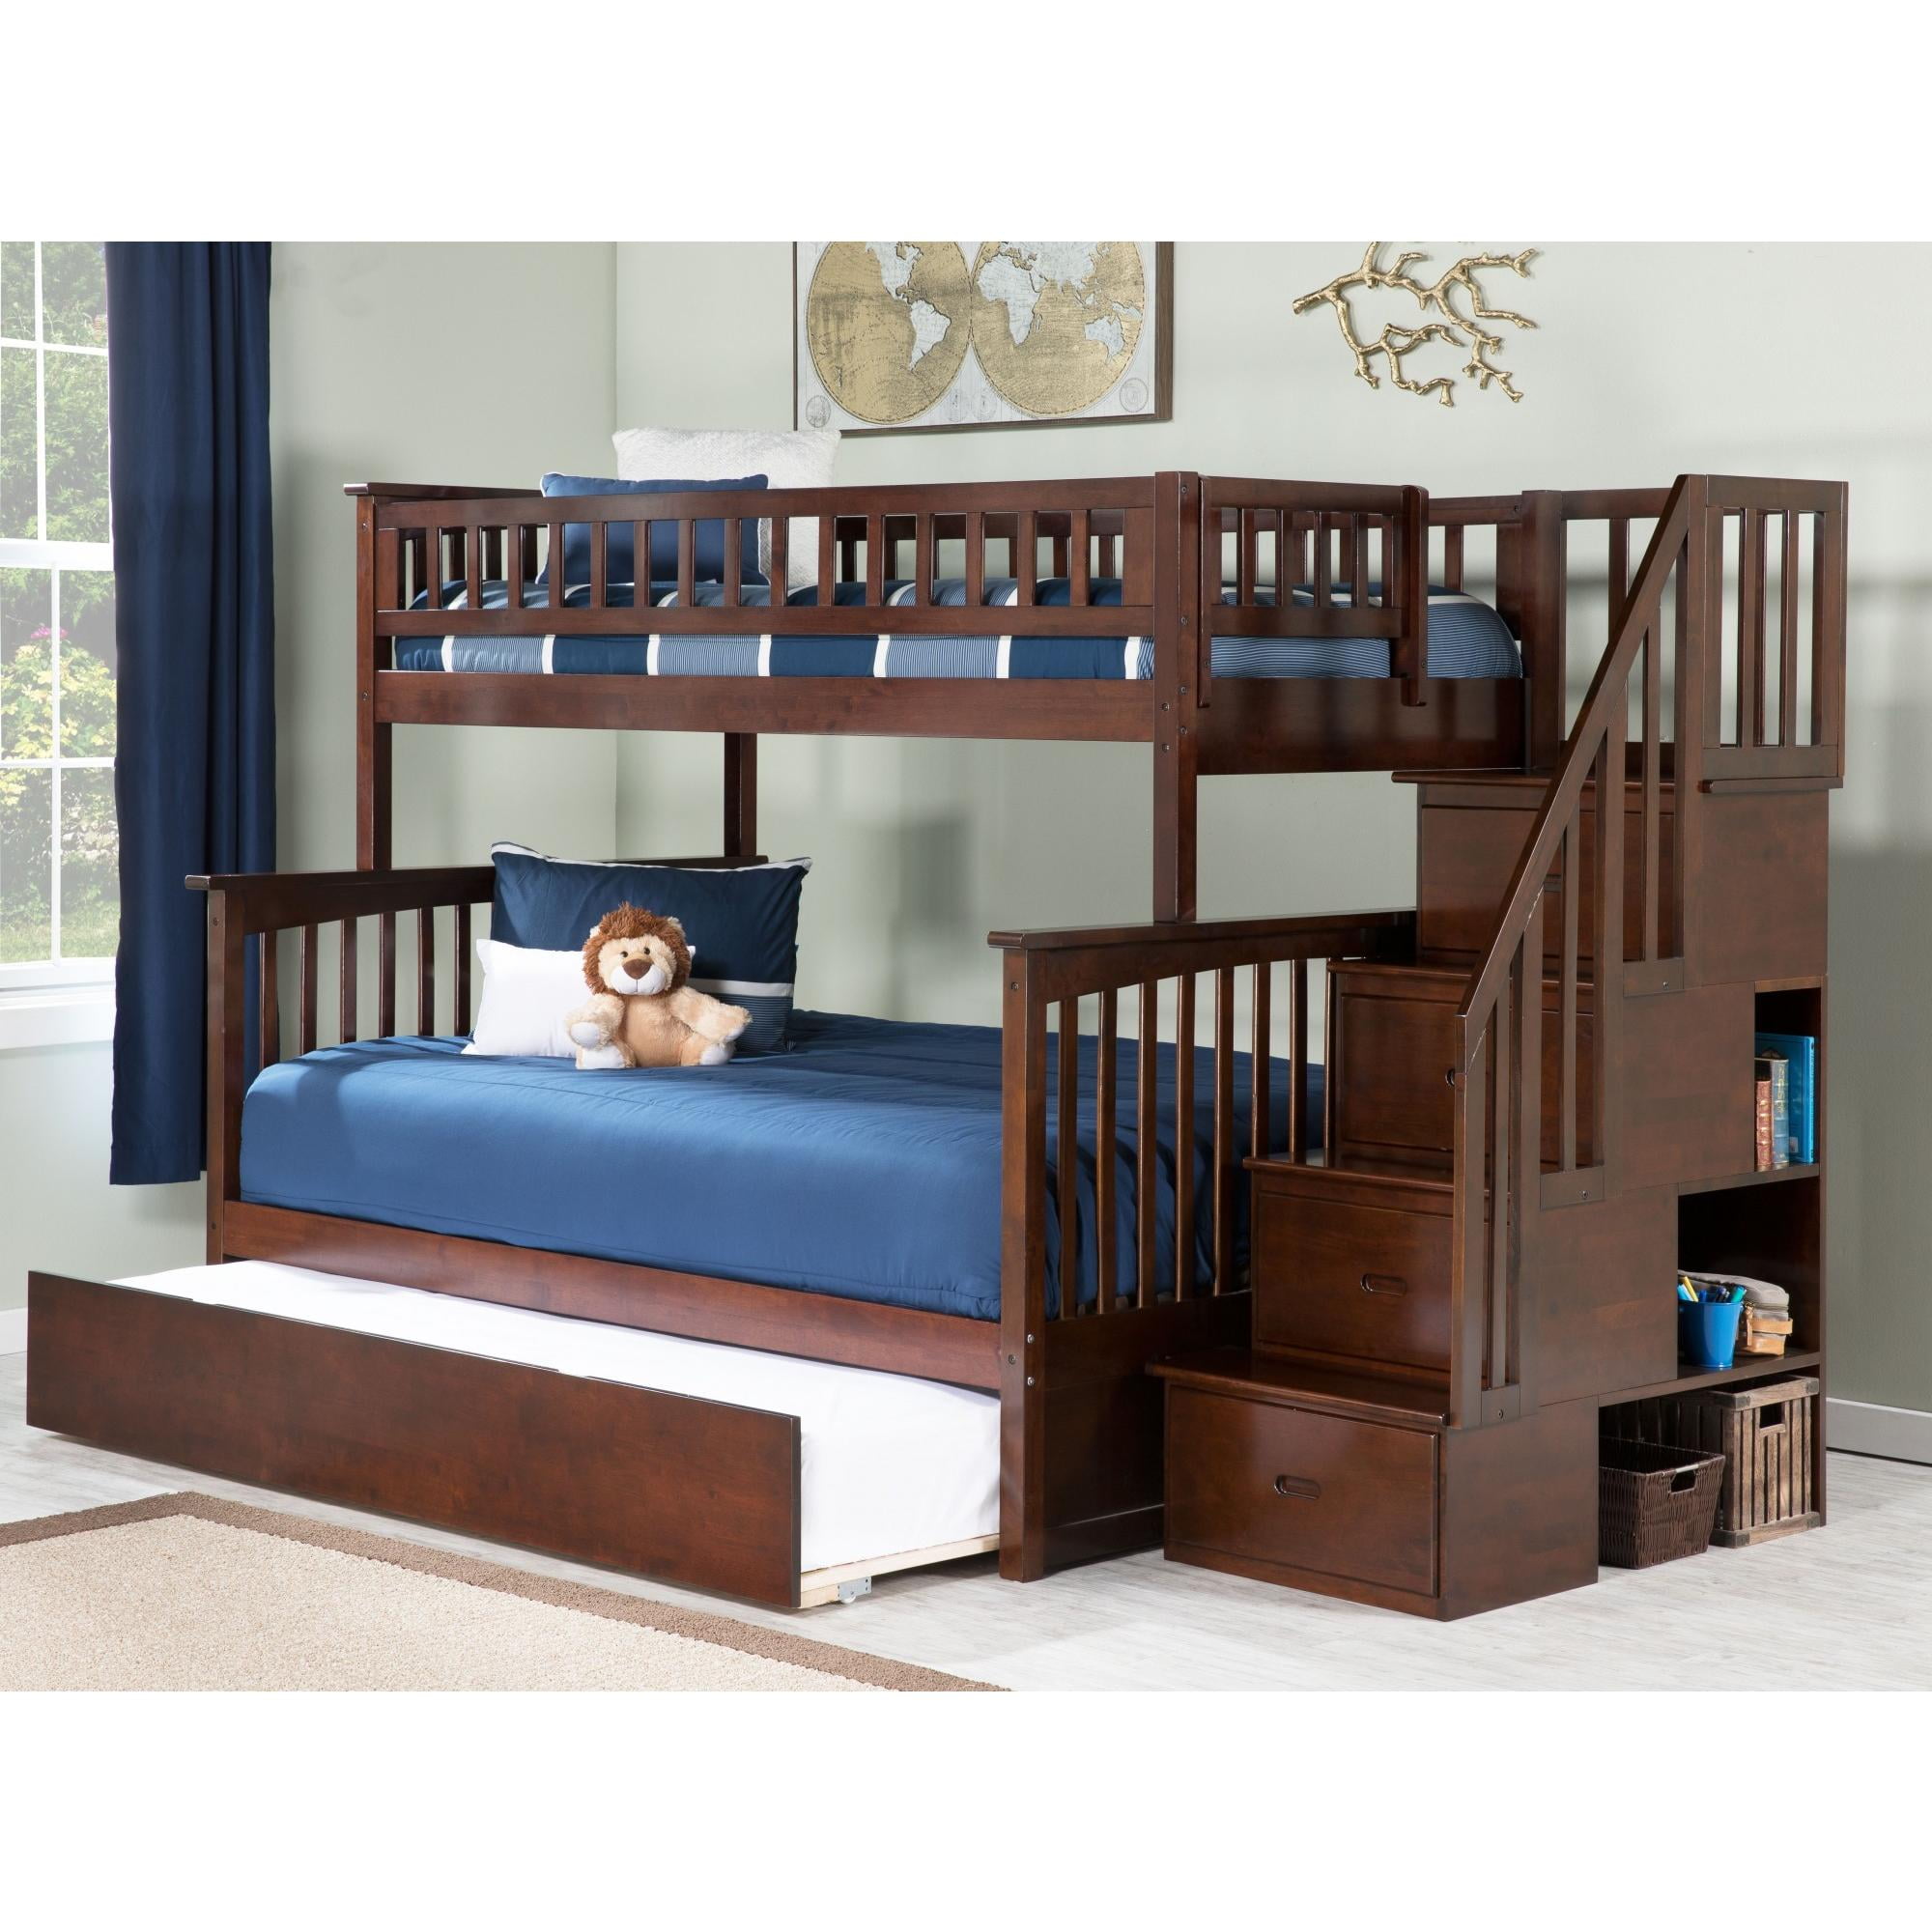 Columbia Staircase Bunk Bed Twin Over, Bunk Bed With Trundle And Stairs Plans